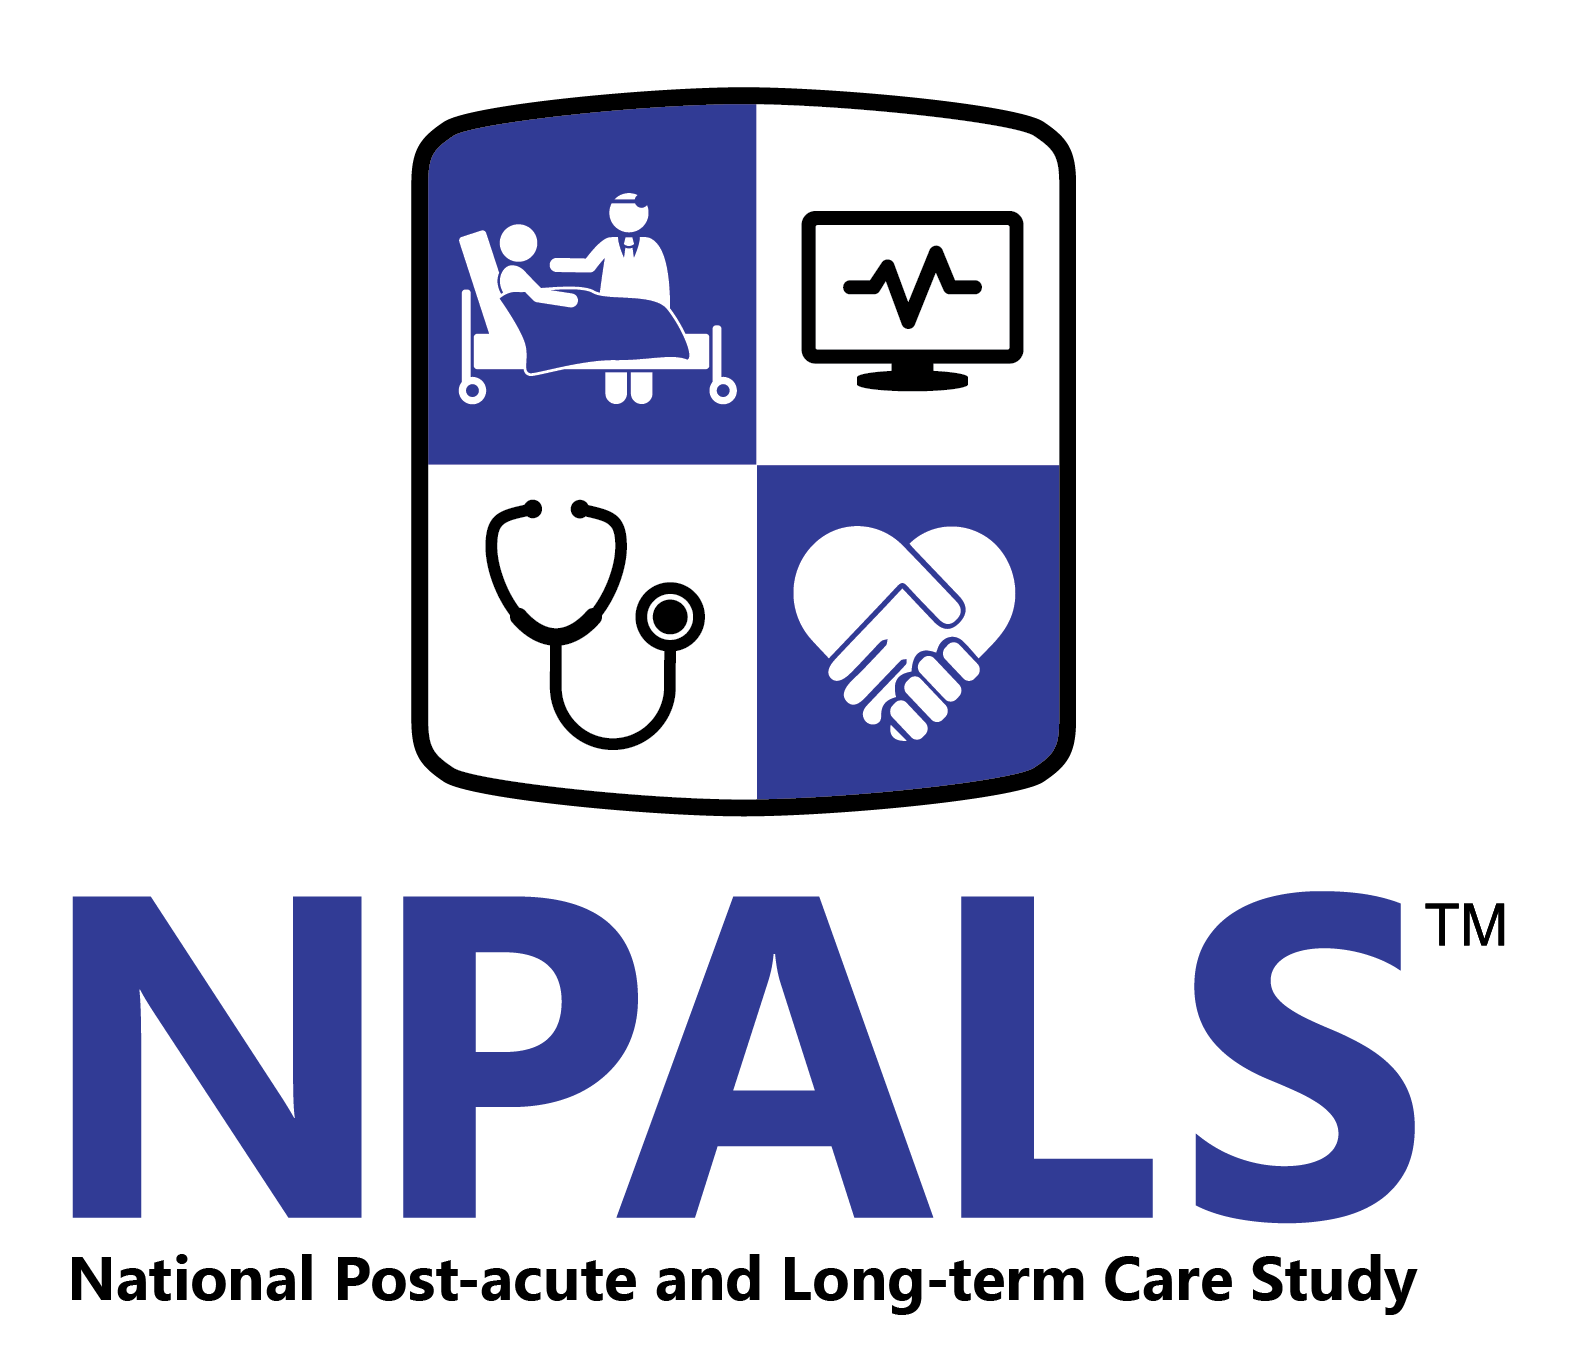 National Post-acute and Long-term Care Survey logo showing a shield with 4 health care-related icons